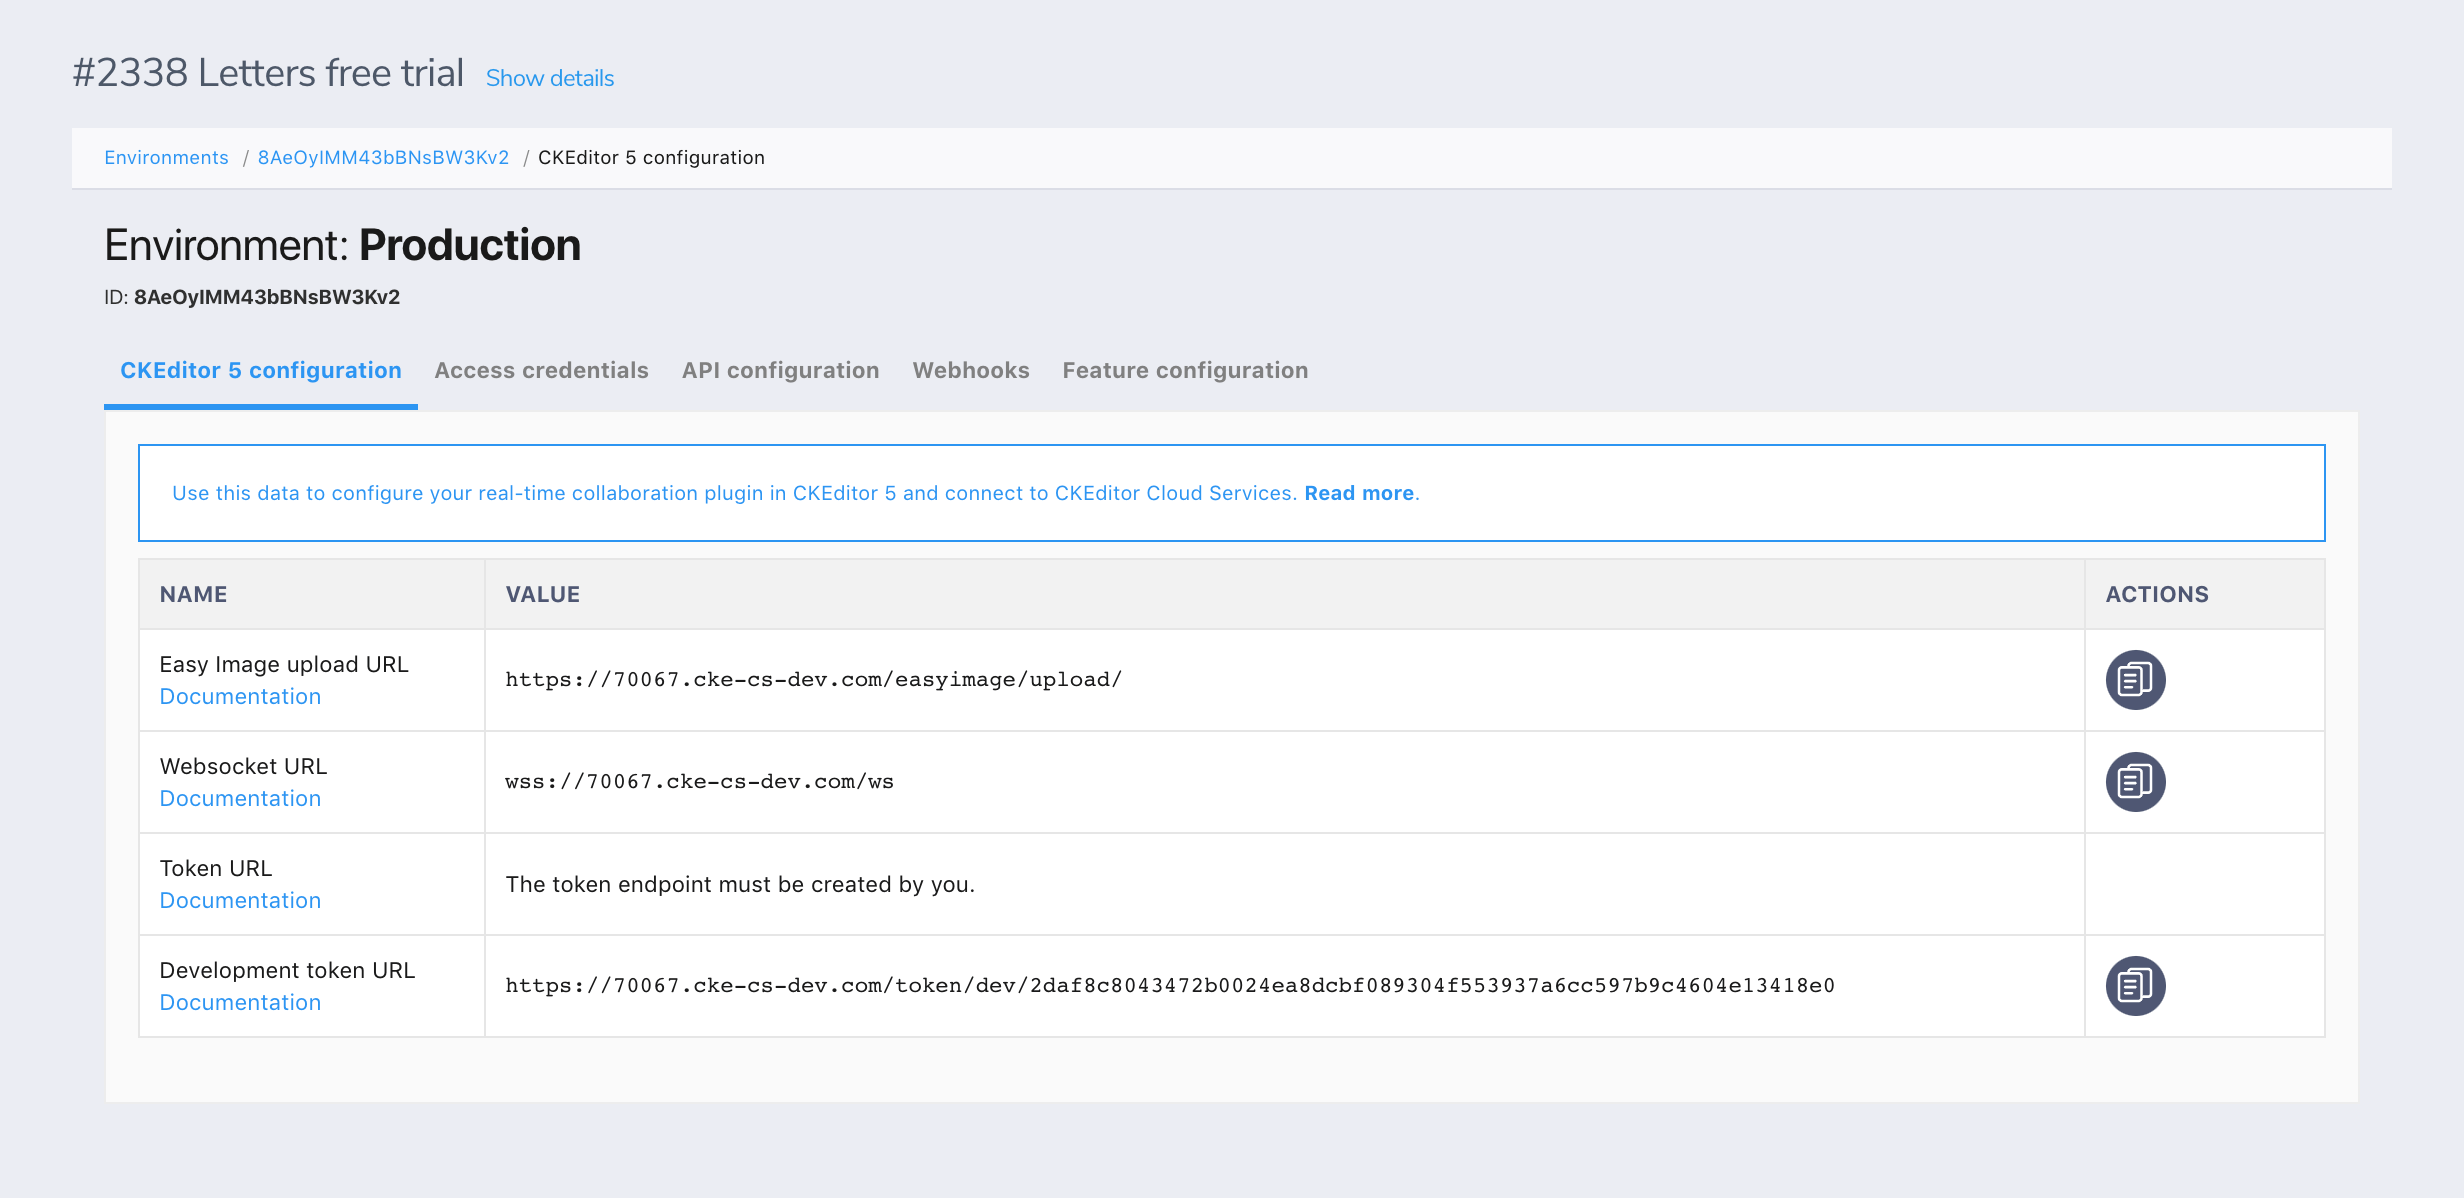 CKEditor 5 Configuration with the development token URL.